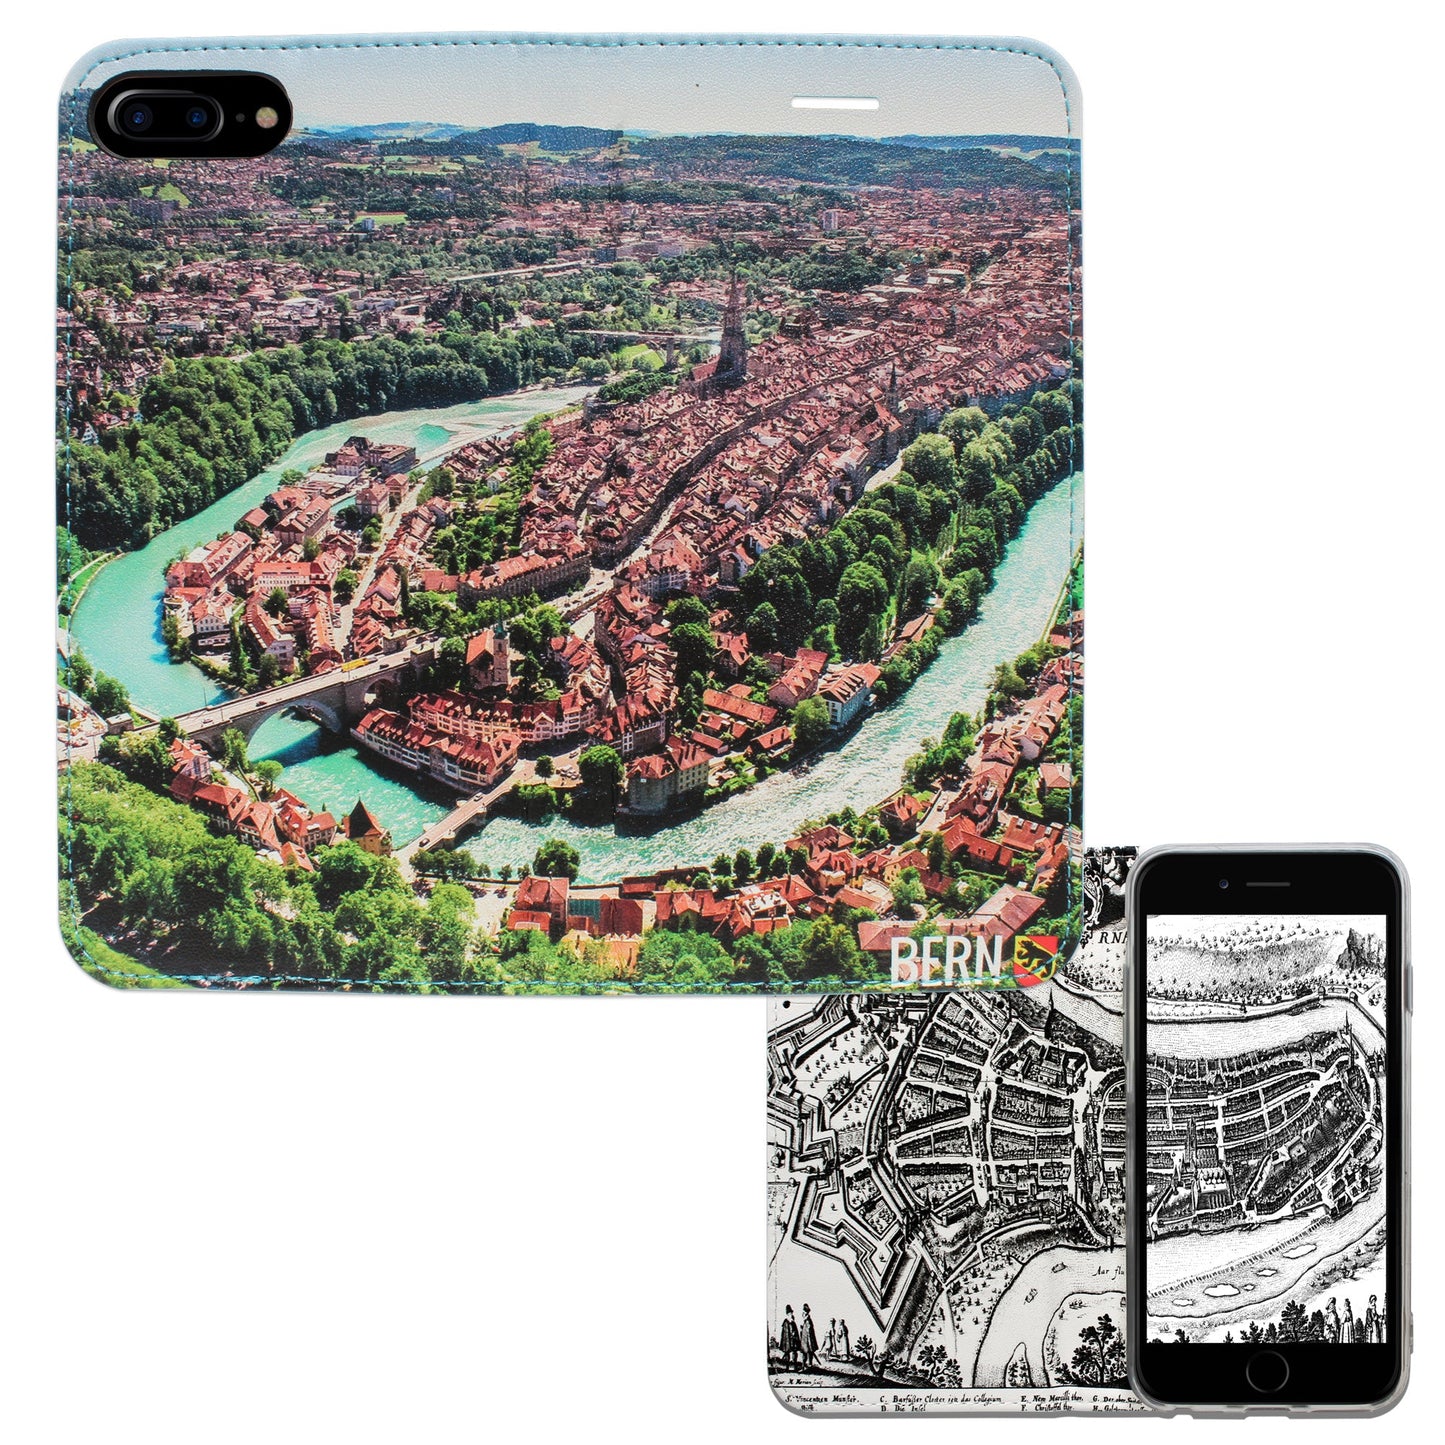 Bern City Panorama Case for iPhone 6/6S/7/8 Plus